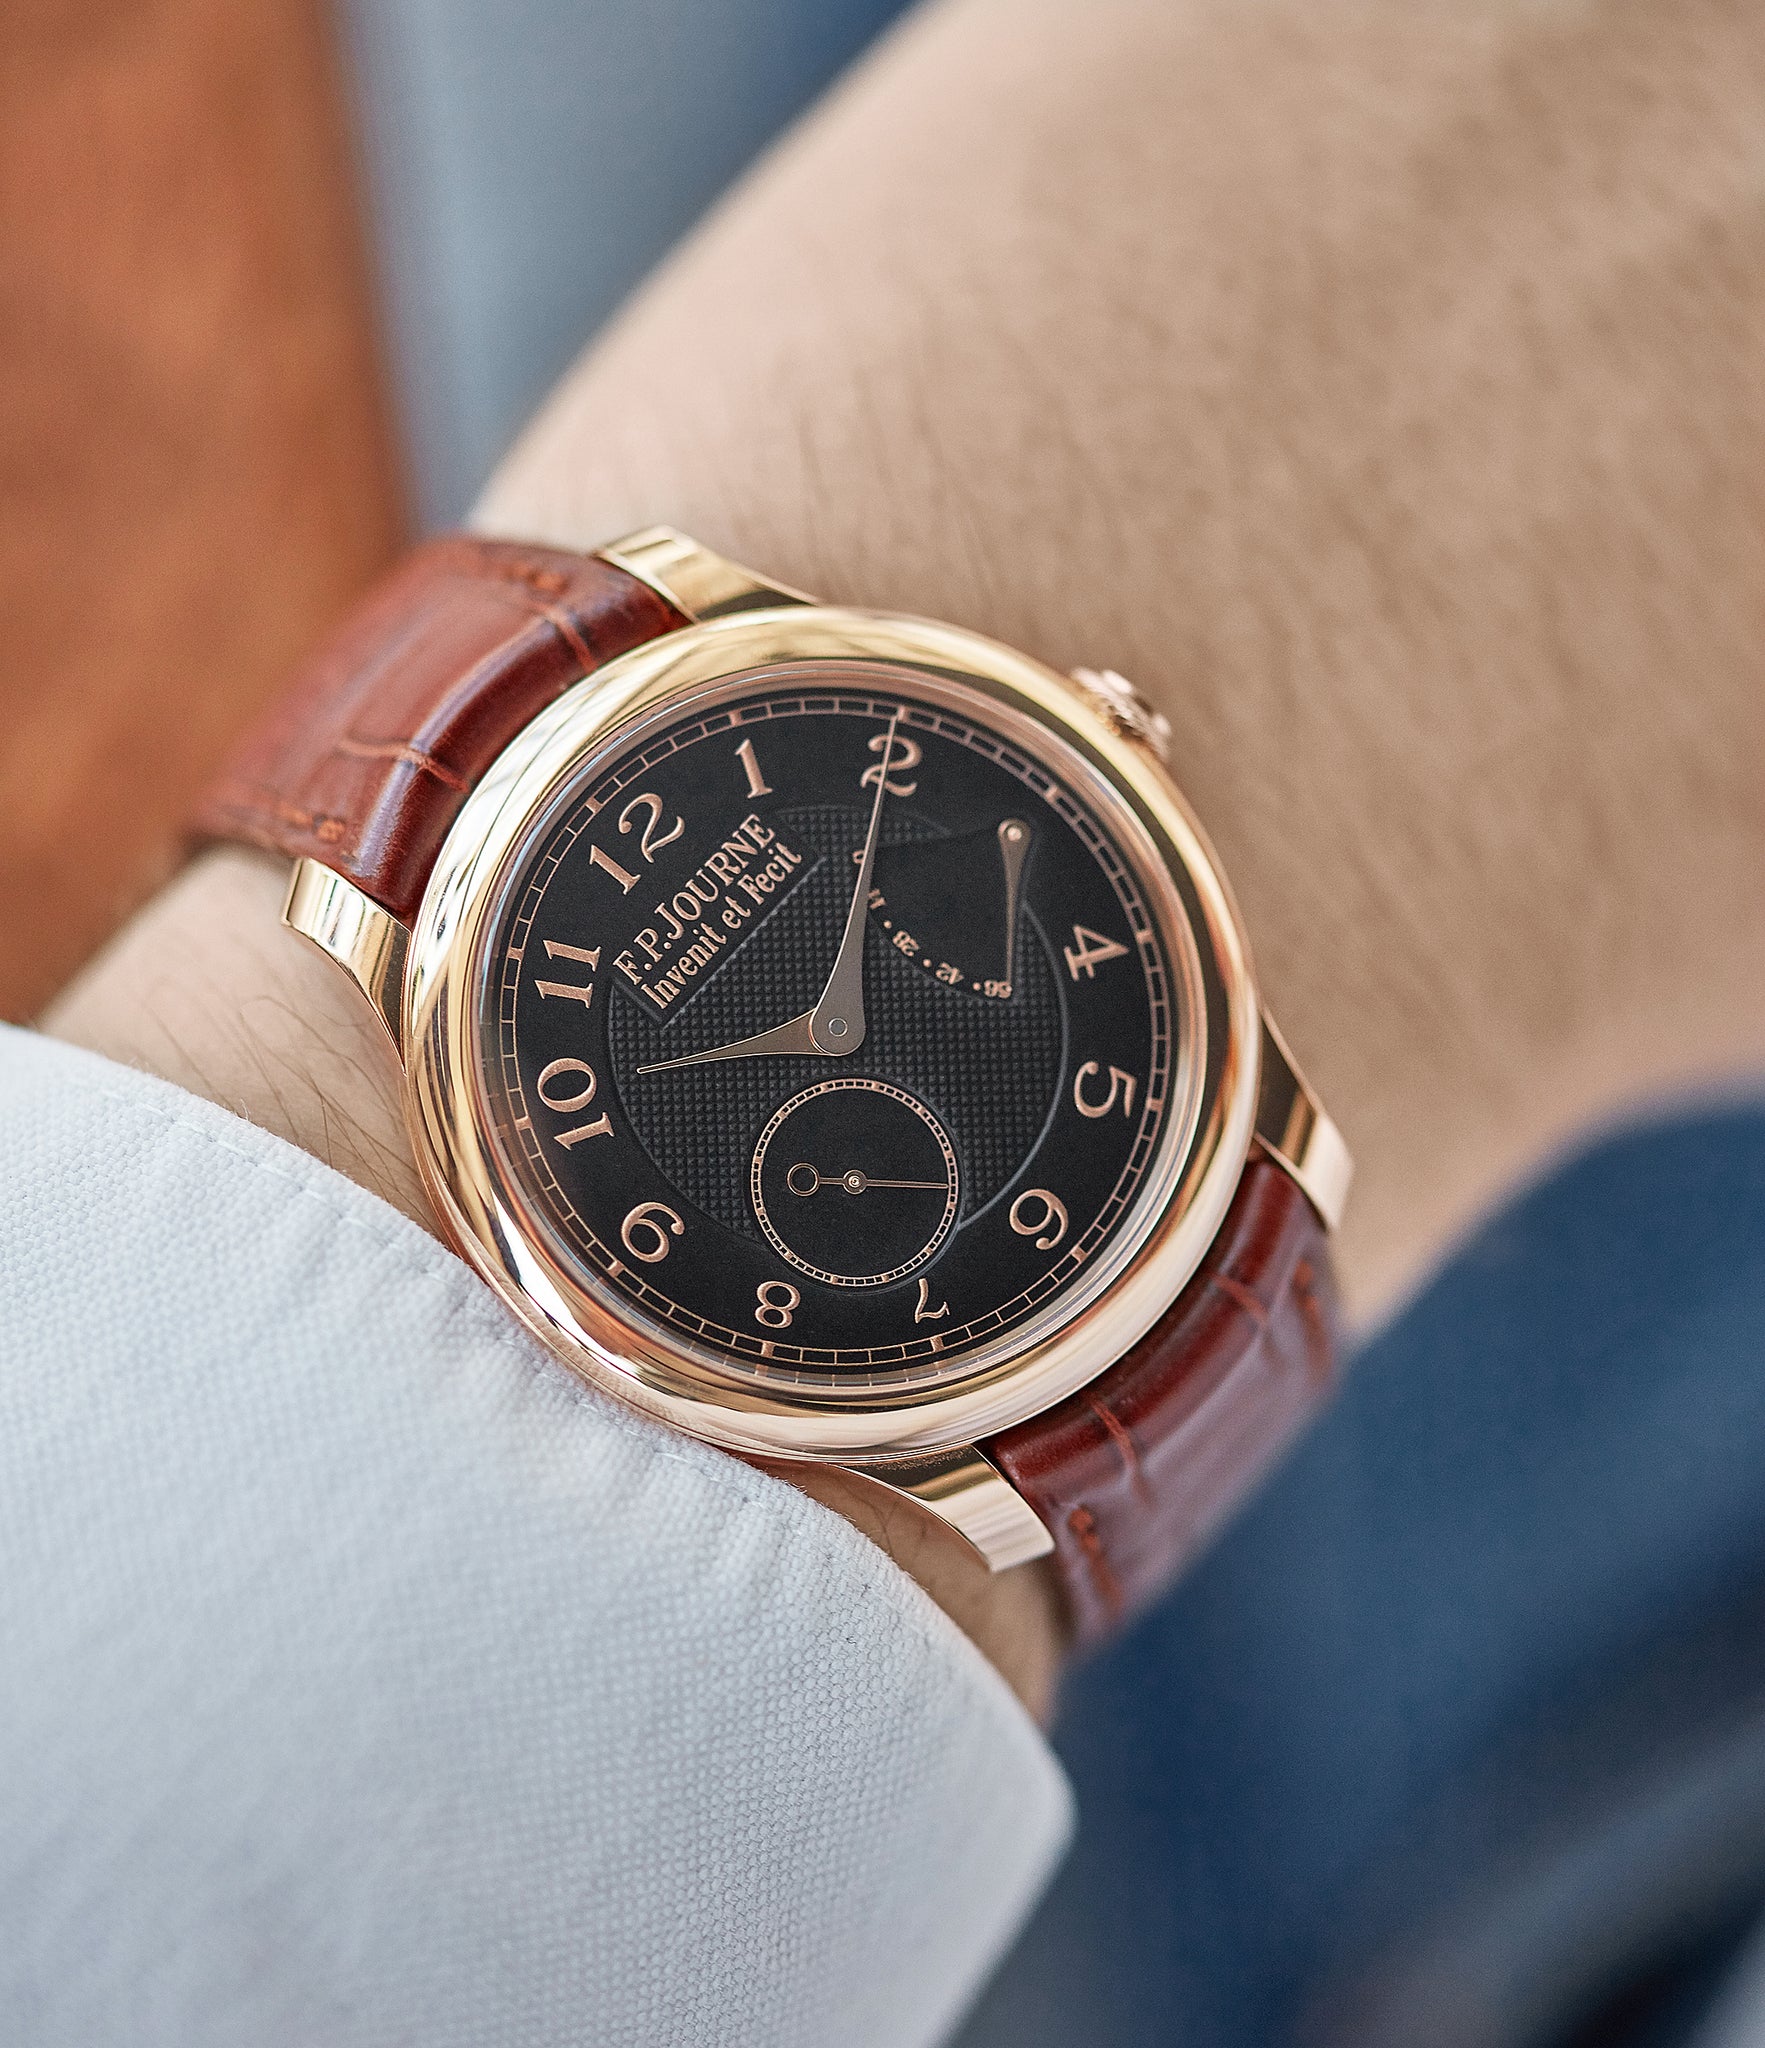 men's dress watch Boutique Edition Journe Chronometre Souverain red gold black dial rare watch independent watchmaker for sale online at A Collected Man London UK specialist of rare watches